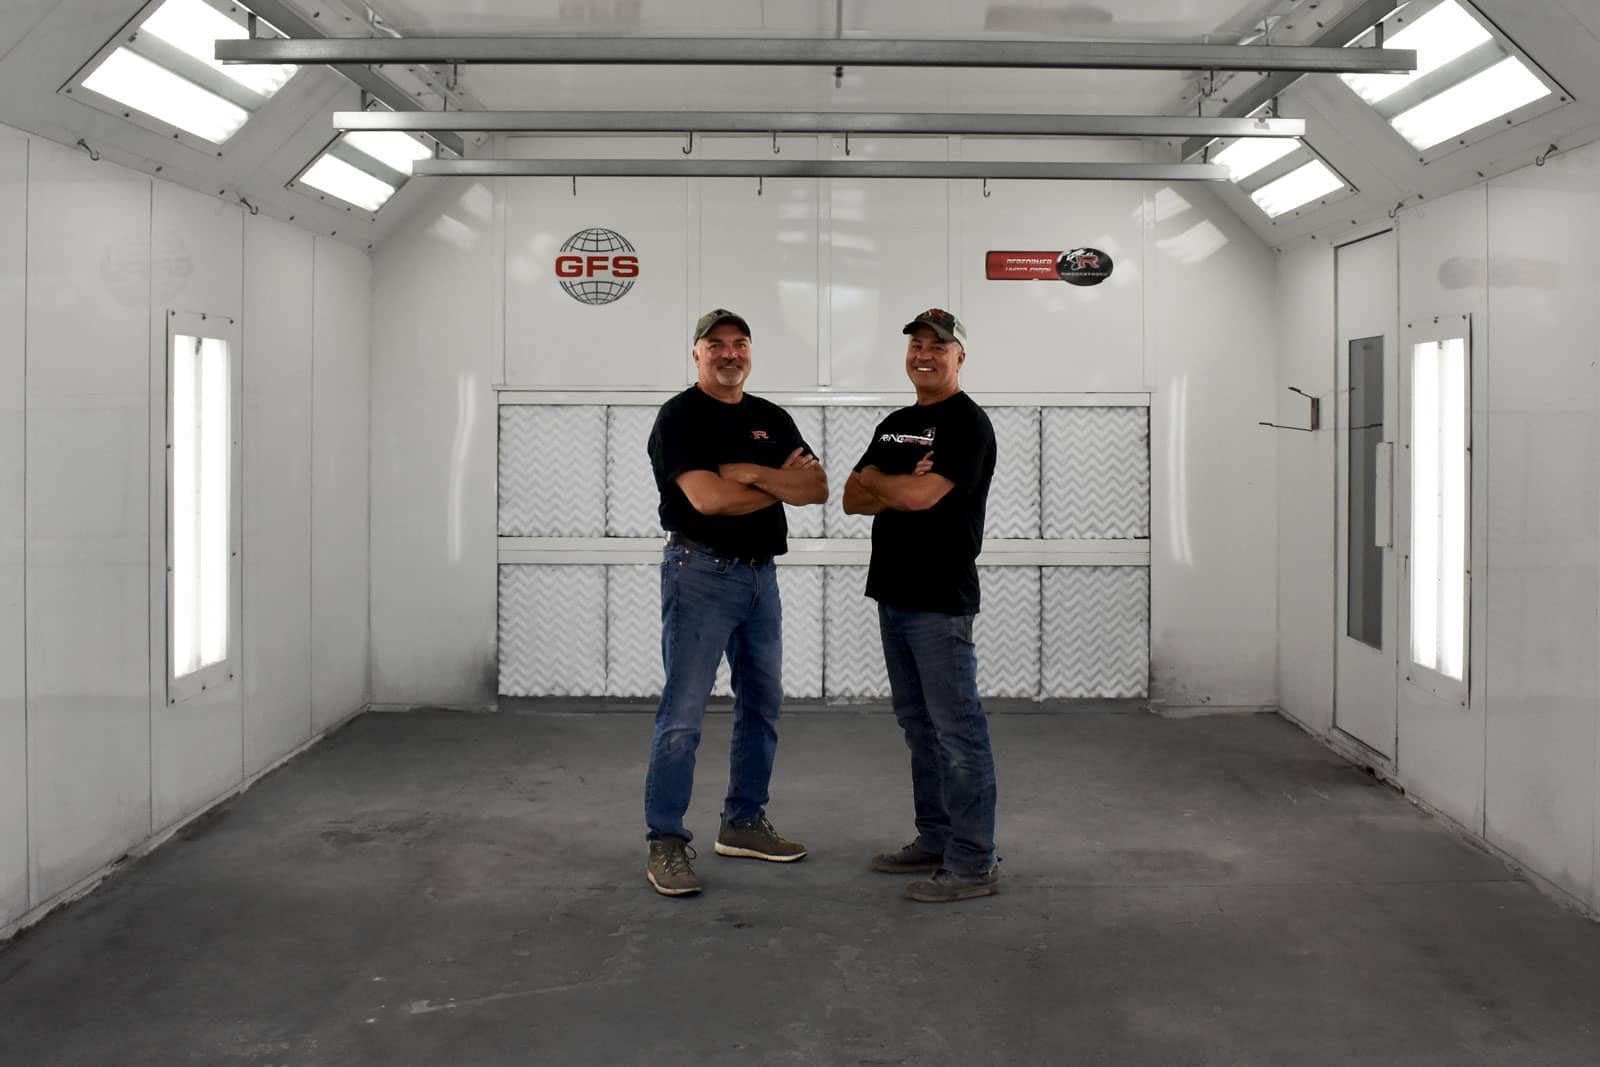 Mike and Jim Ring of the Ringbrothers inside their GFS Paint Booth